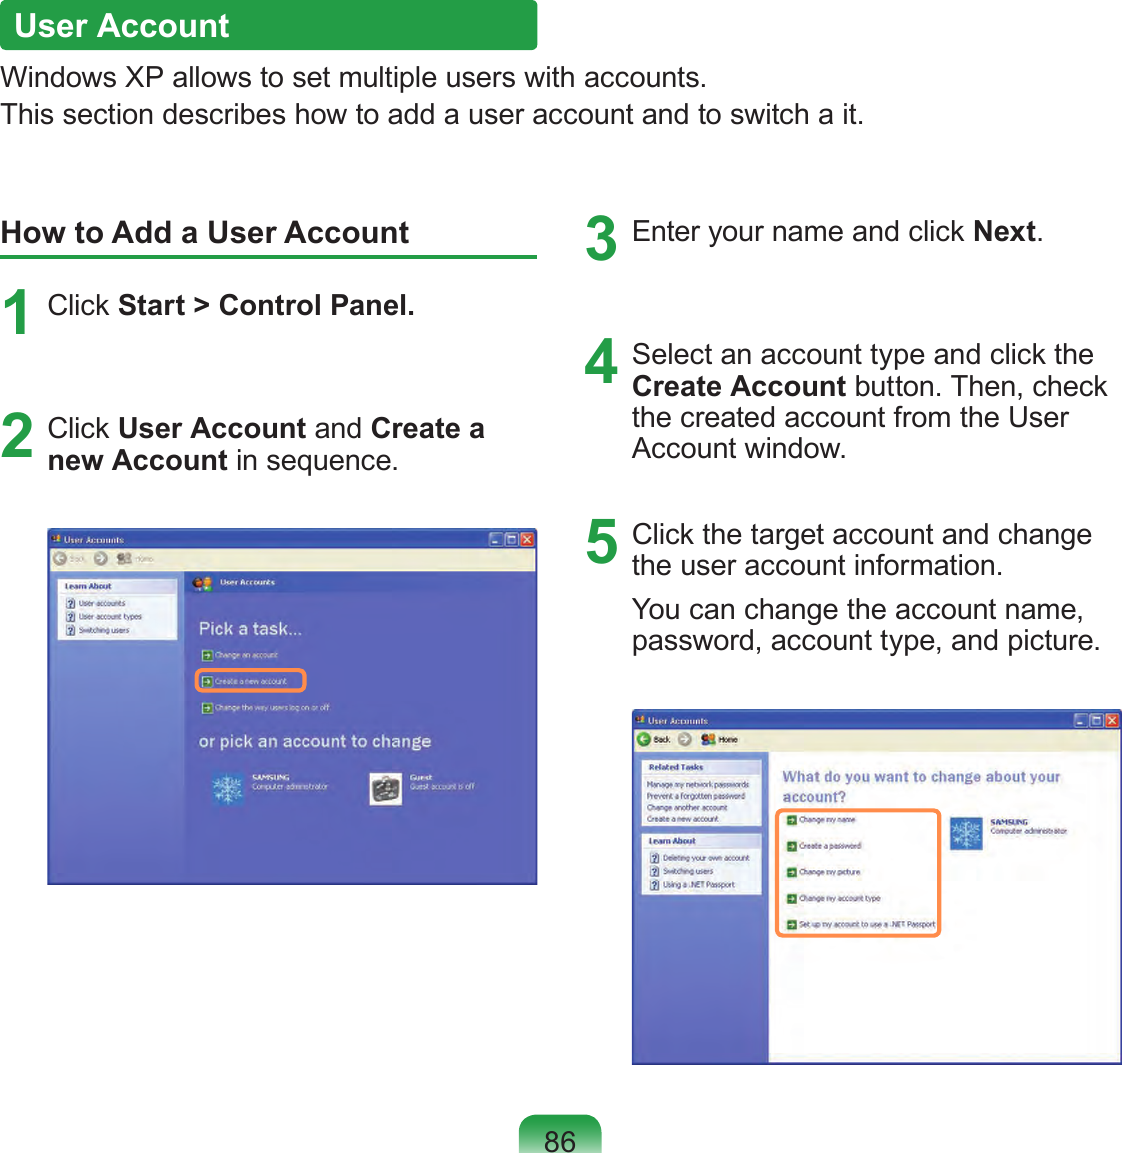 86User AccountWindows XP allows to set multiple users with accounts.This section describes how to add a user account and to switch a it.How to Add a User Account1  Click Start &gt; Control Panel.2  Click User Account and Create a new Account in sequence.3  Enter your name and click Next.4  Select an account type and click the Create Account button. Then, check the created account from the User Account window.5  Click the target account and change the user account information.You can change the account name, password, account type, and picture.